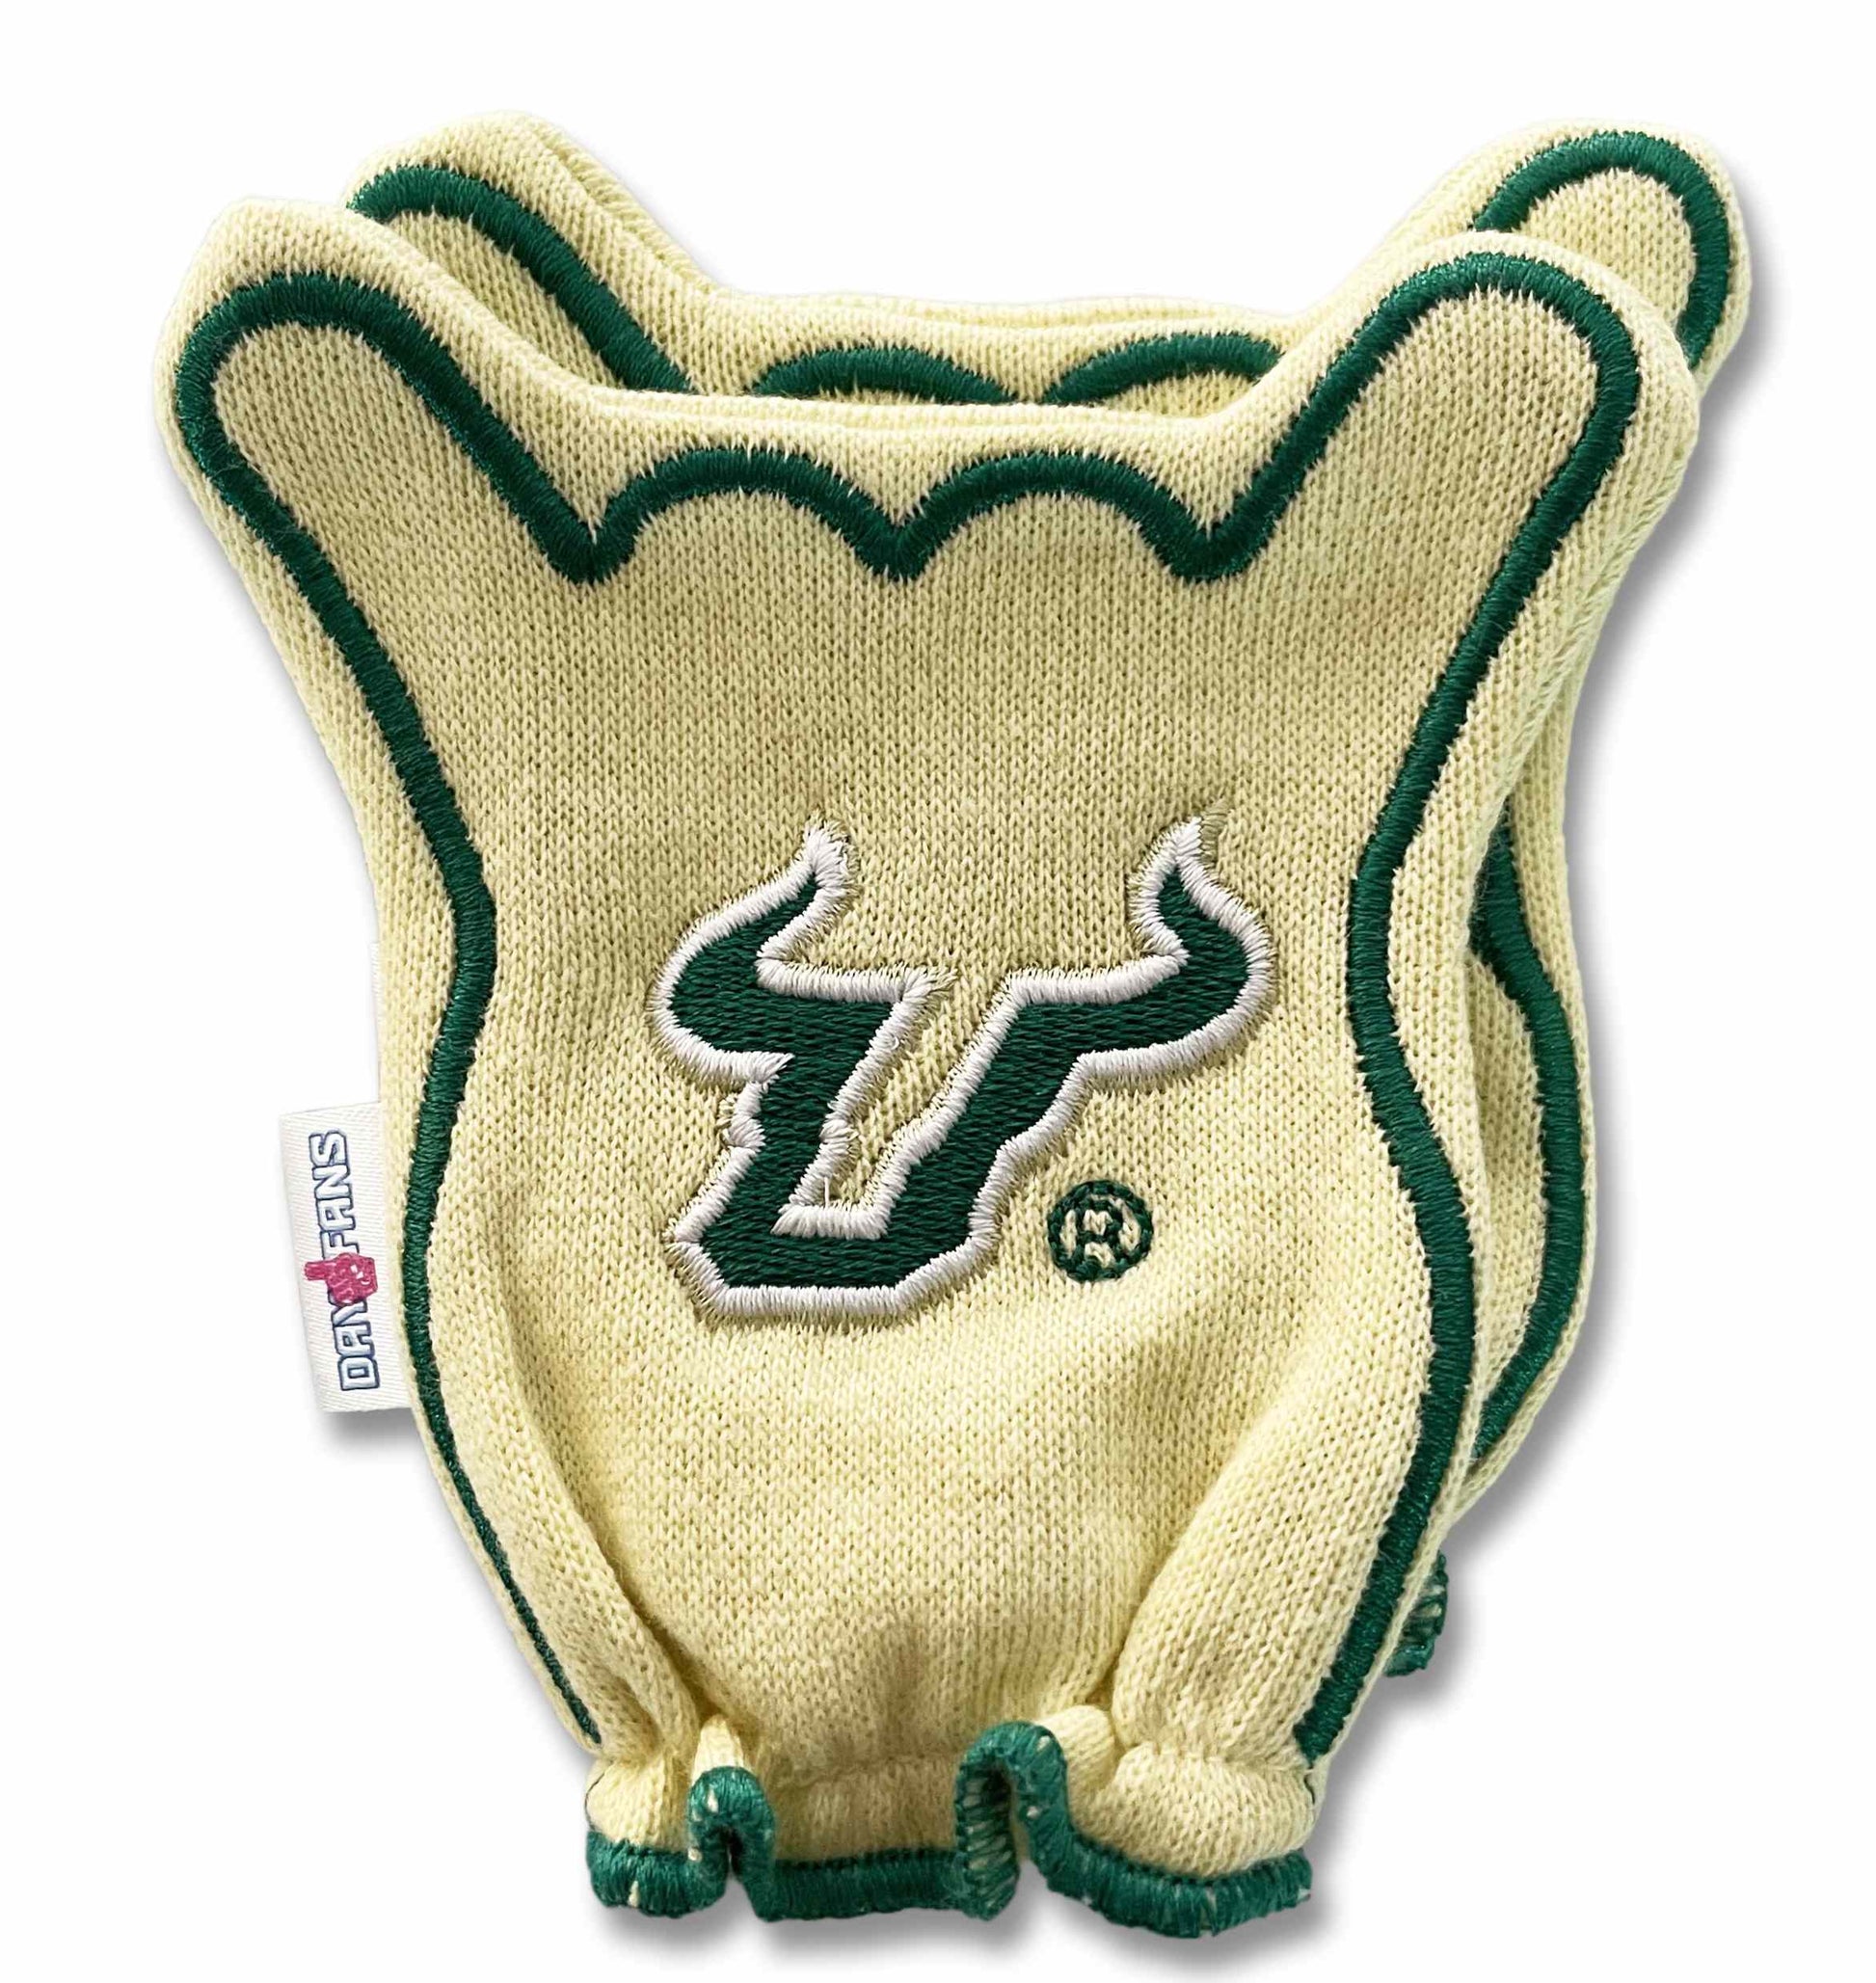 USF Go Bulls FanMitts Baby Mittens Gold Back Pair Stacked